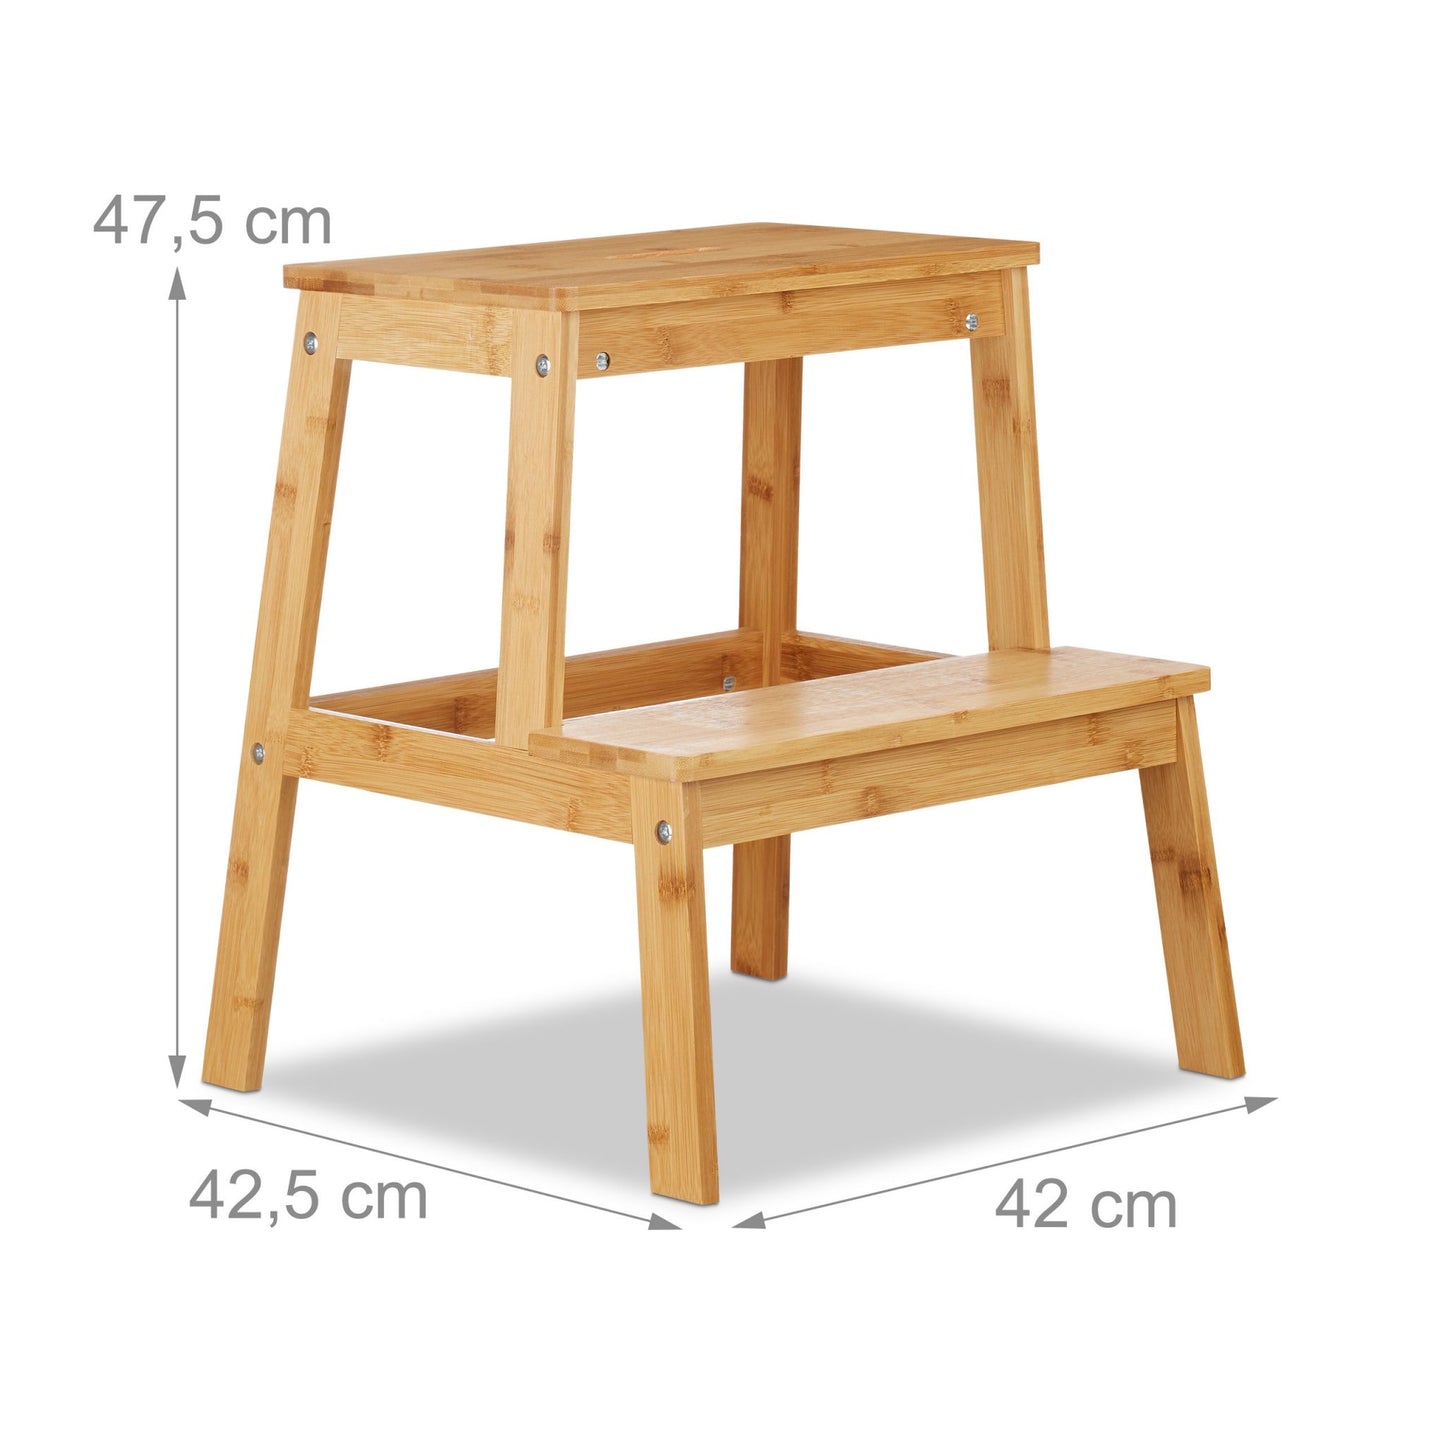 RelaxDays Double-Step Stool Flower Stand Bamboo Bathrooms